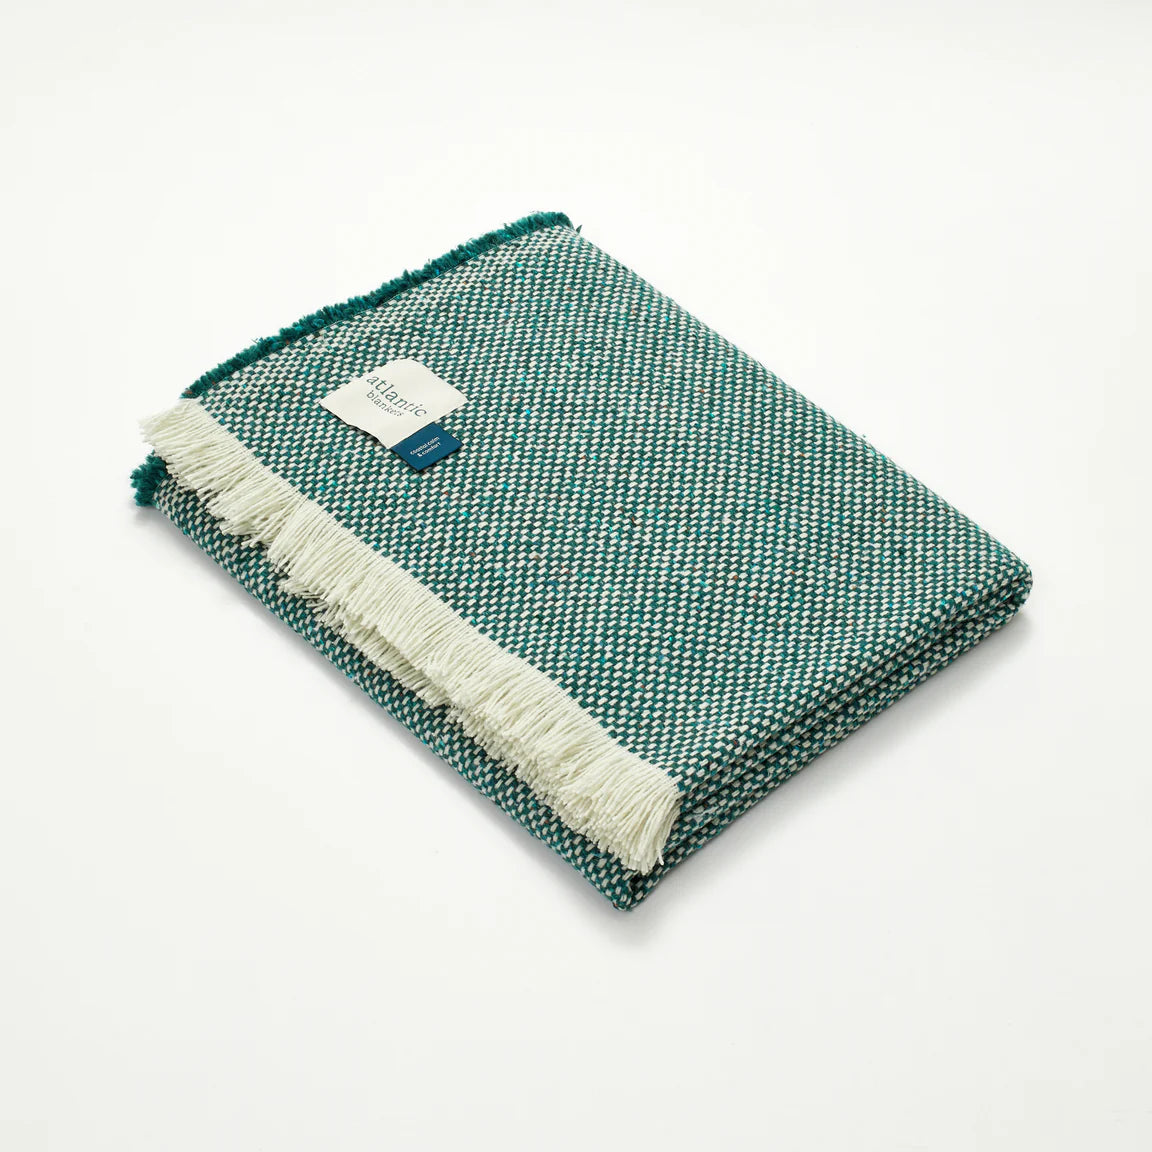 Recycled Wool Blanket - Seagreen